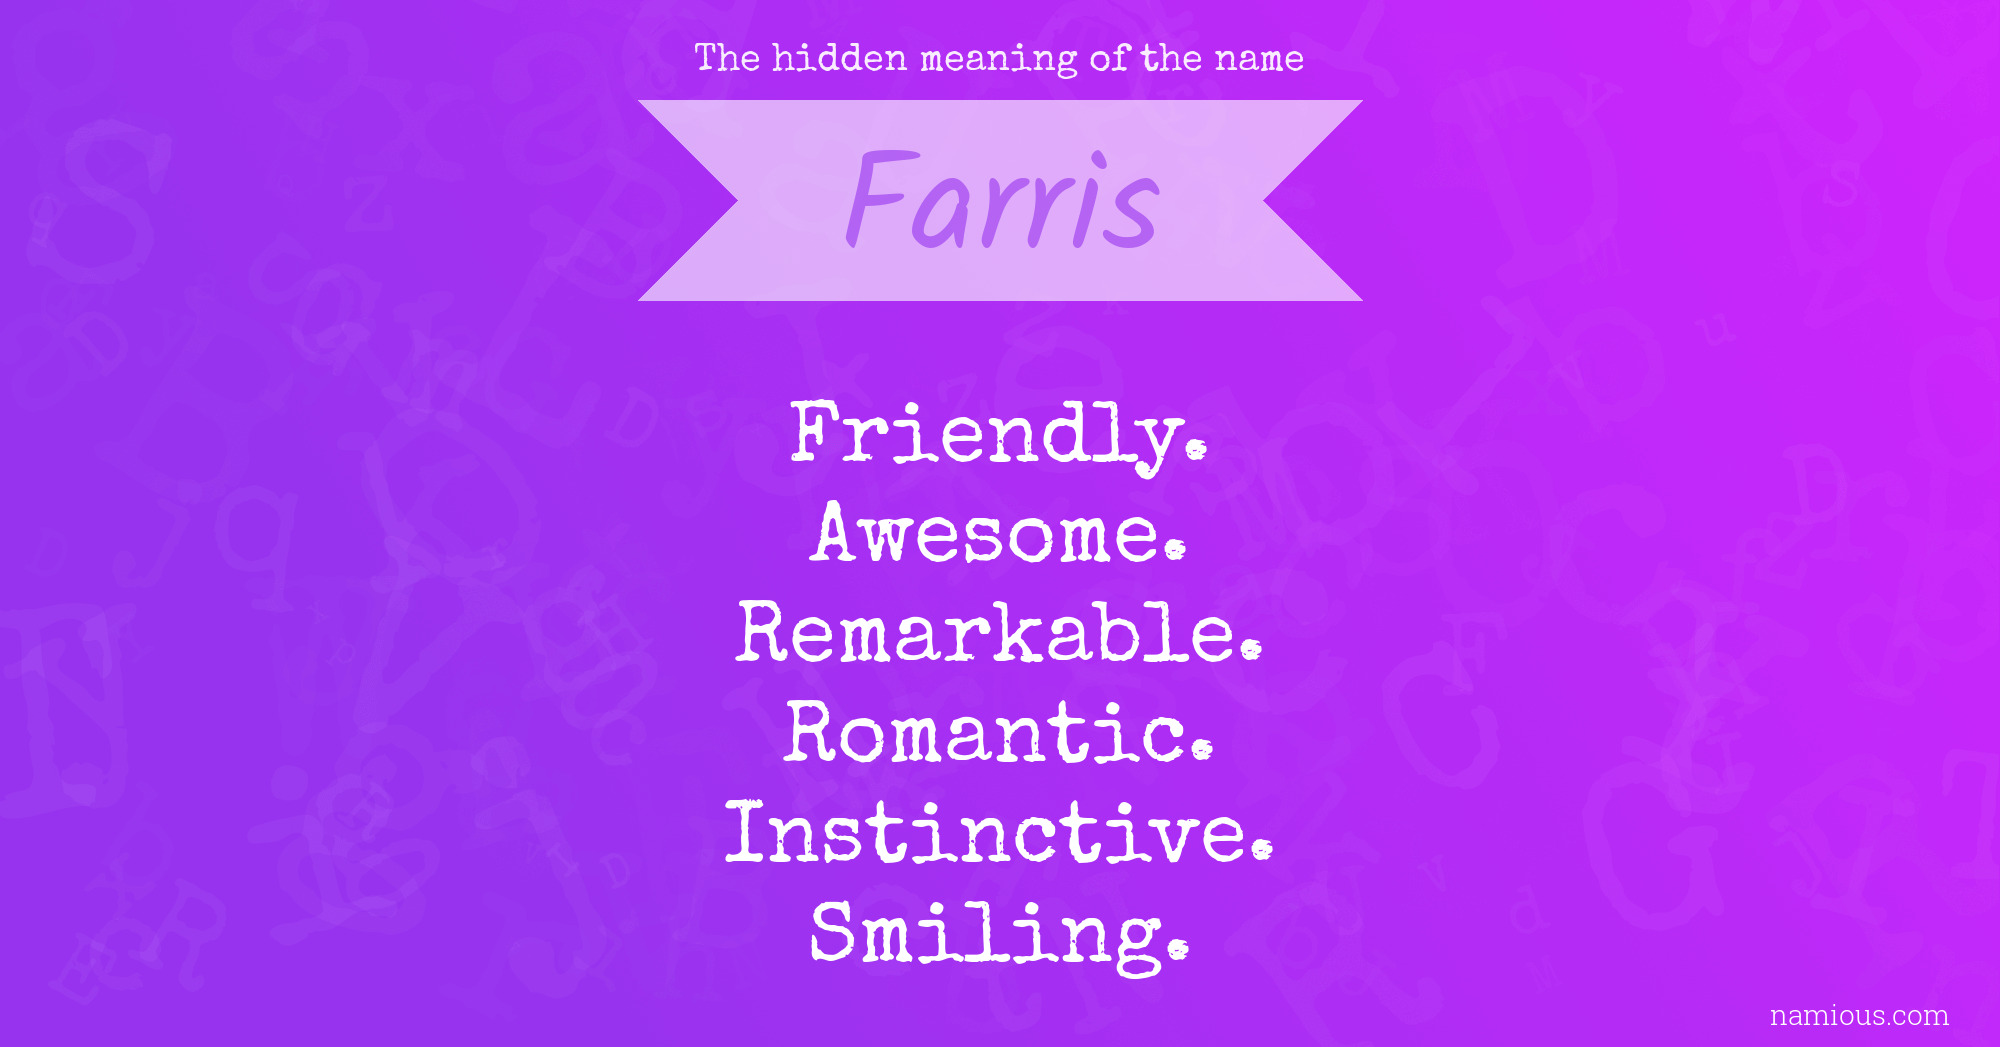 The hidden meaning of the name Farris